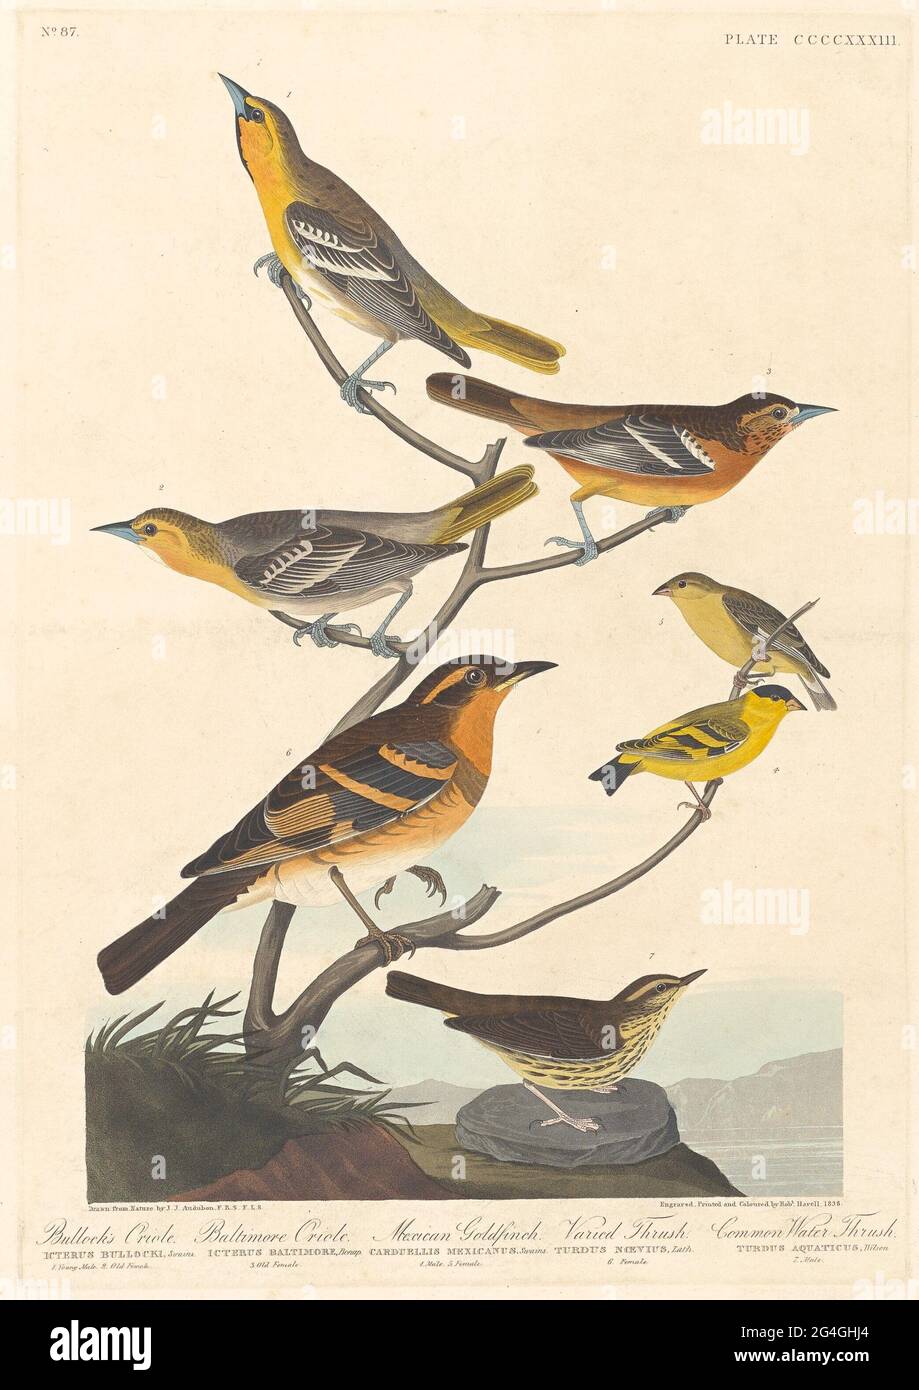 Bullock's Oriole, Baltimore Oriole, Mexican Goldfinch and Varied Thrush, 1838. Stock Photo